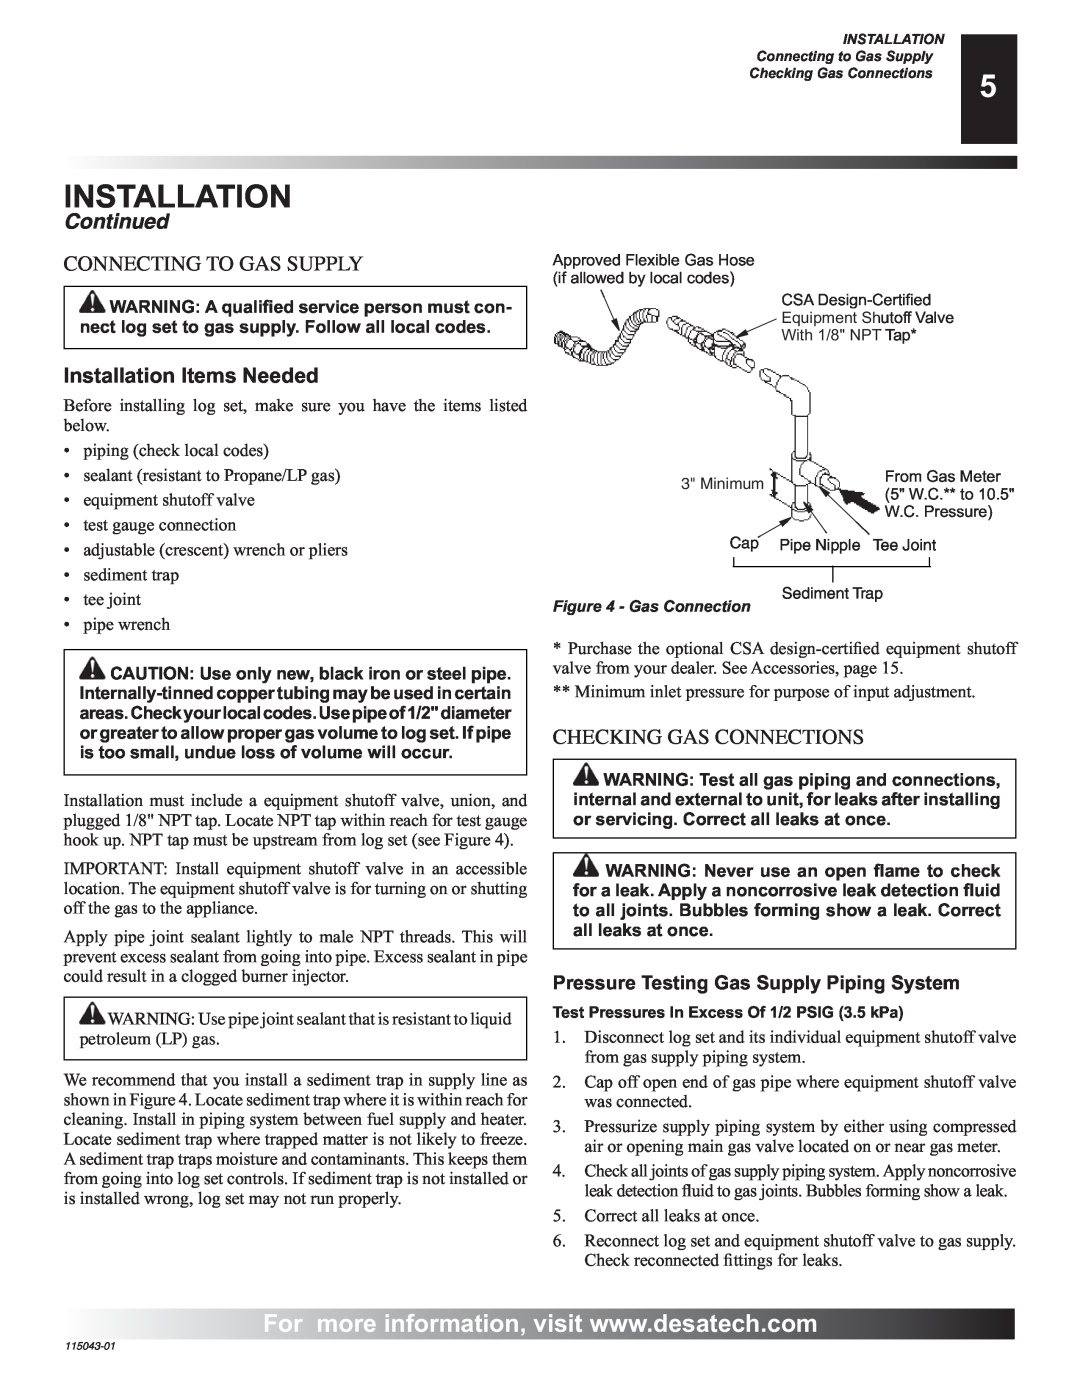 Desa RGA 2-72 installation manual Continued, Installation, Connecting To Gas Supply, Checking Gas Connections 